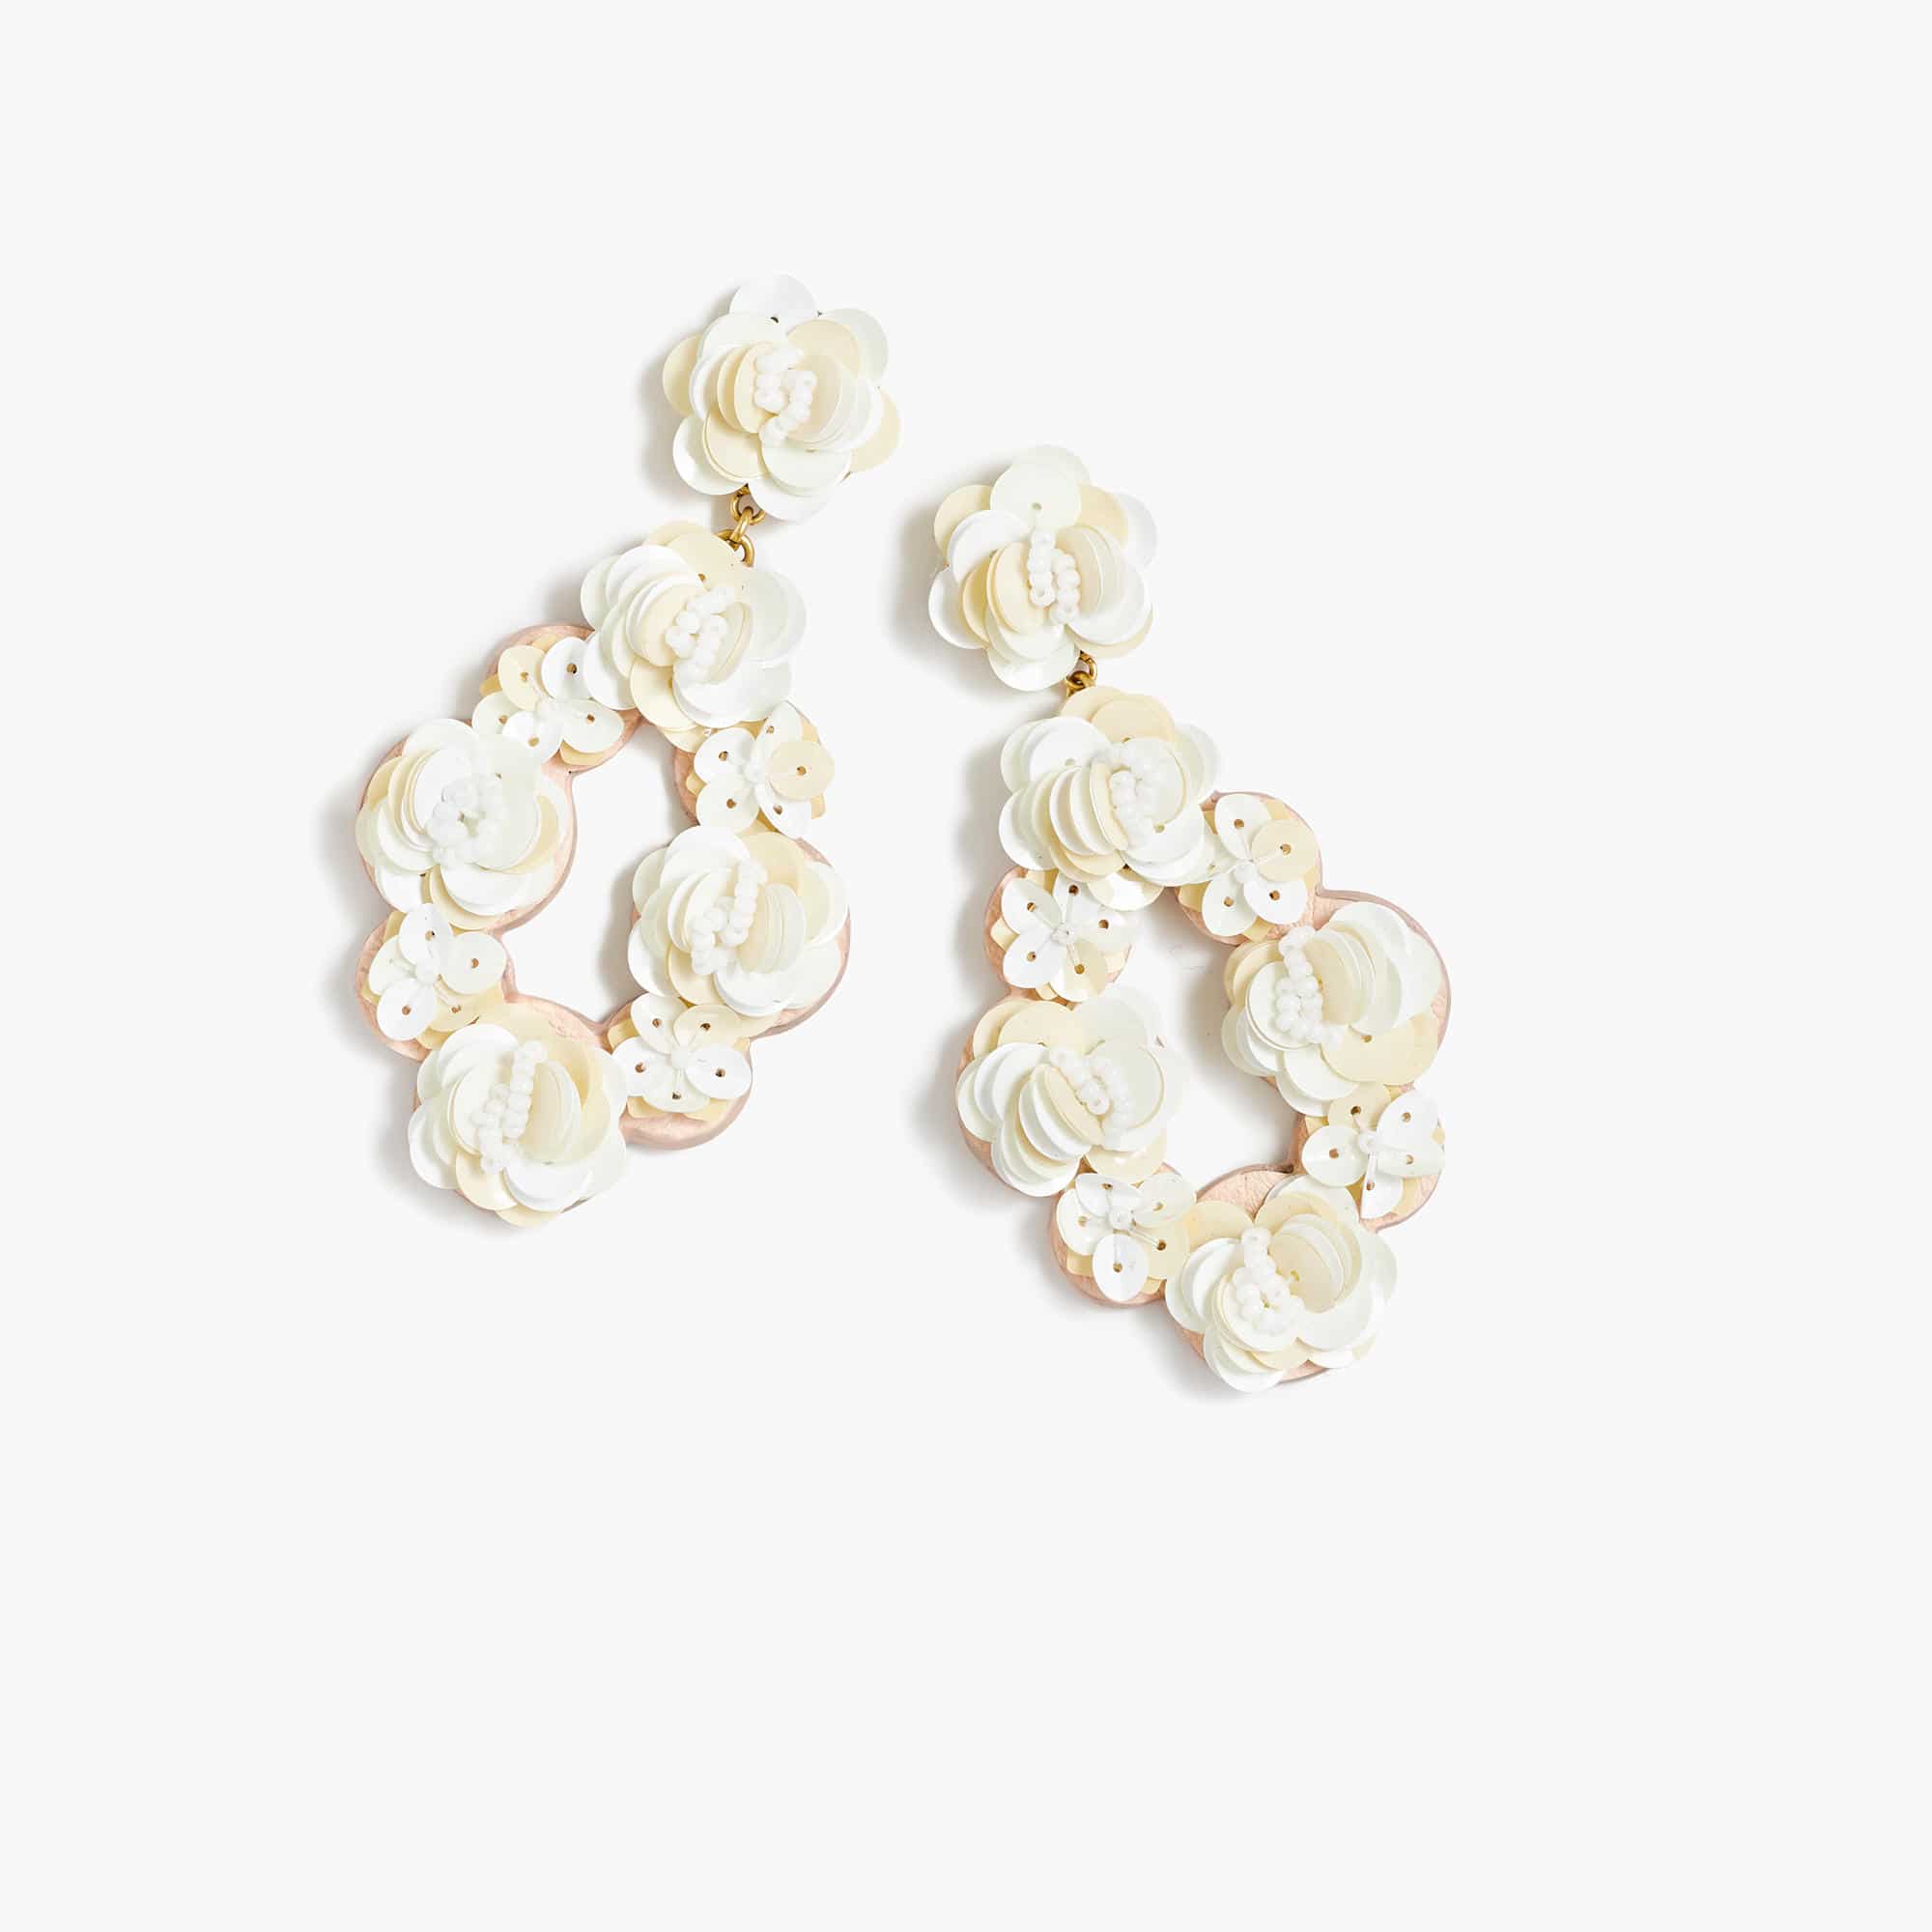 The Fashion Magpie JCrew Floral Drop Earrings